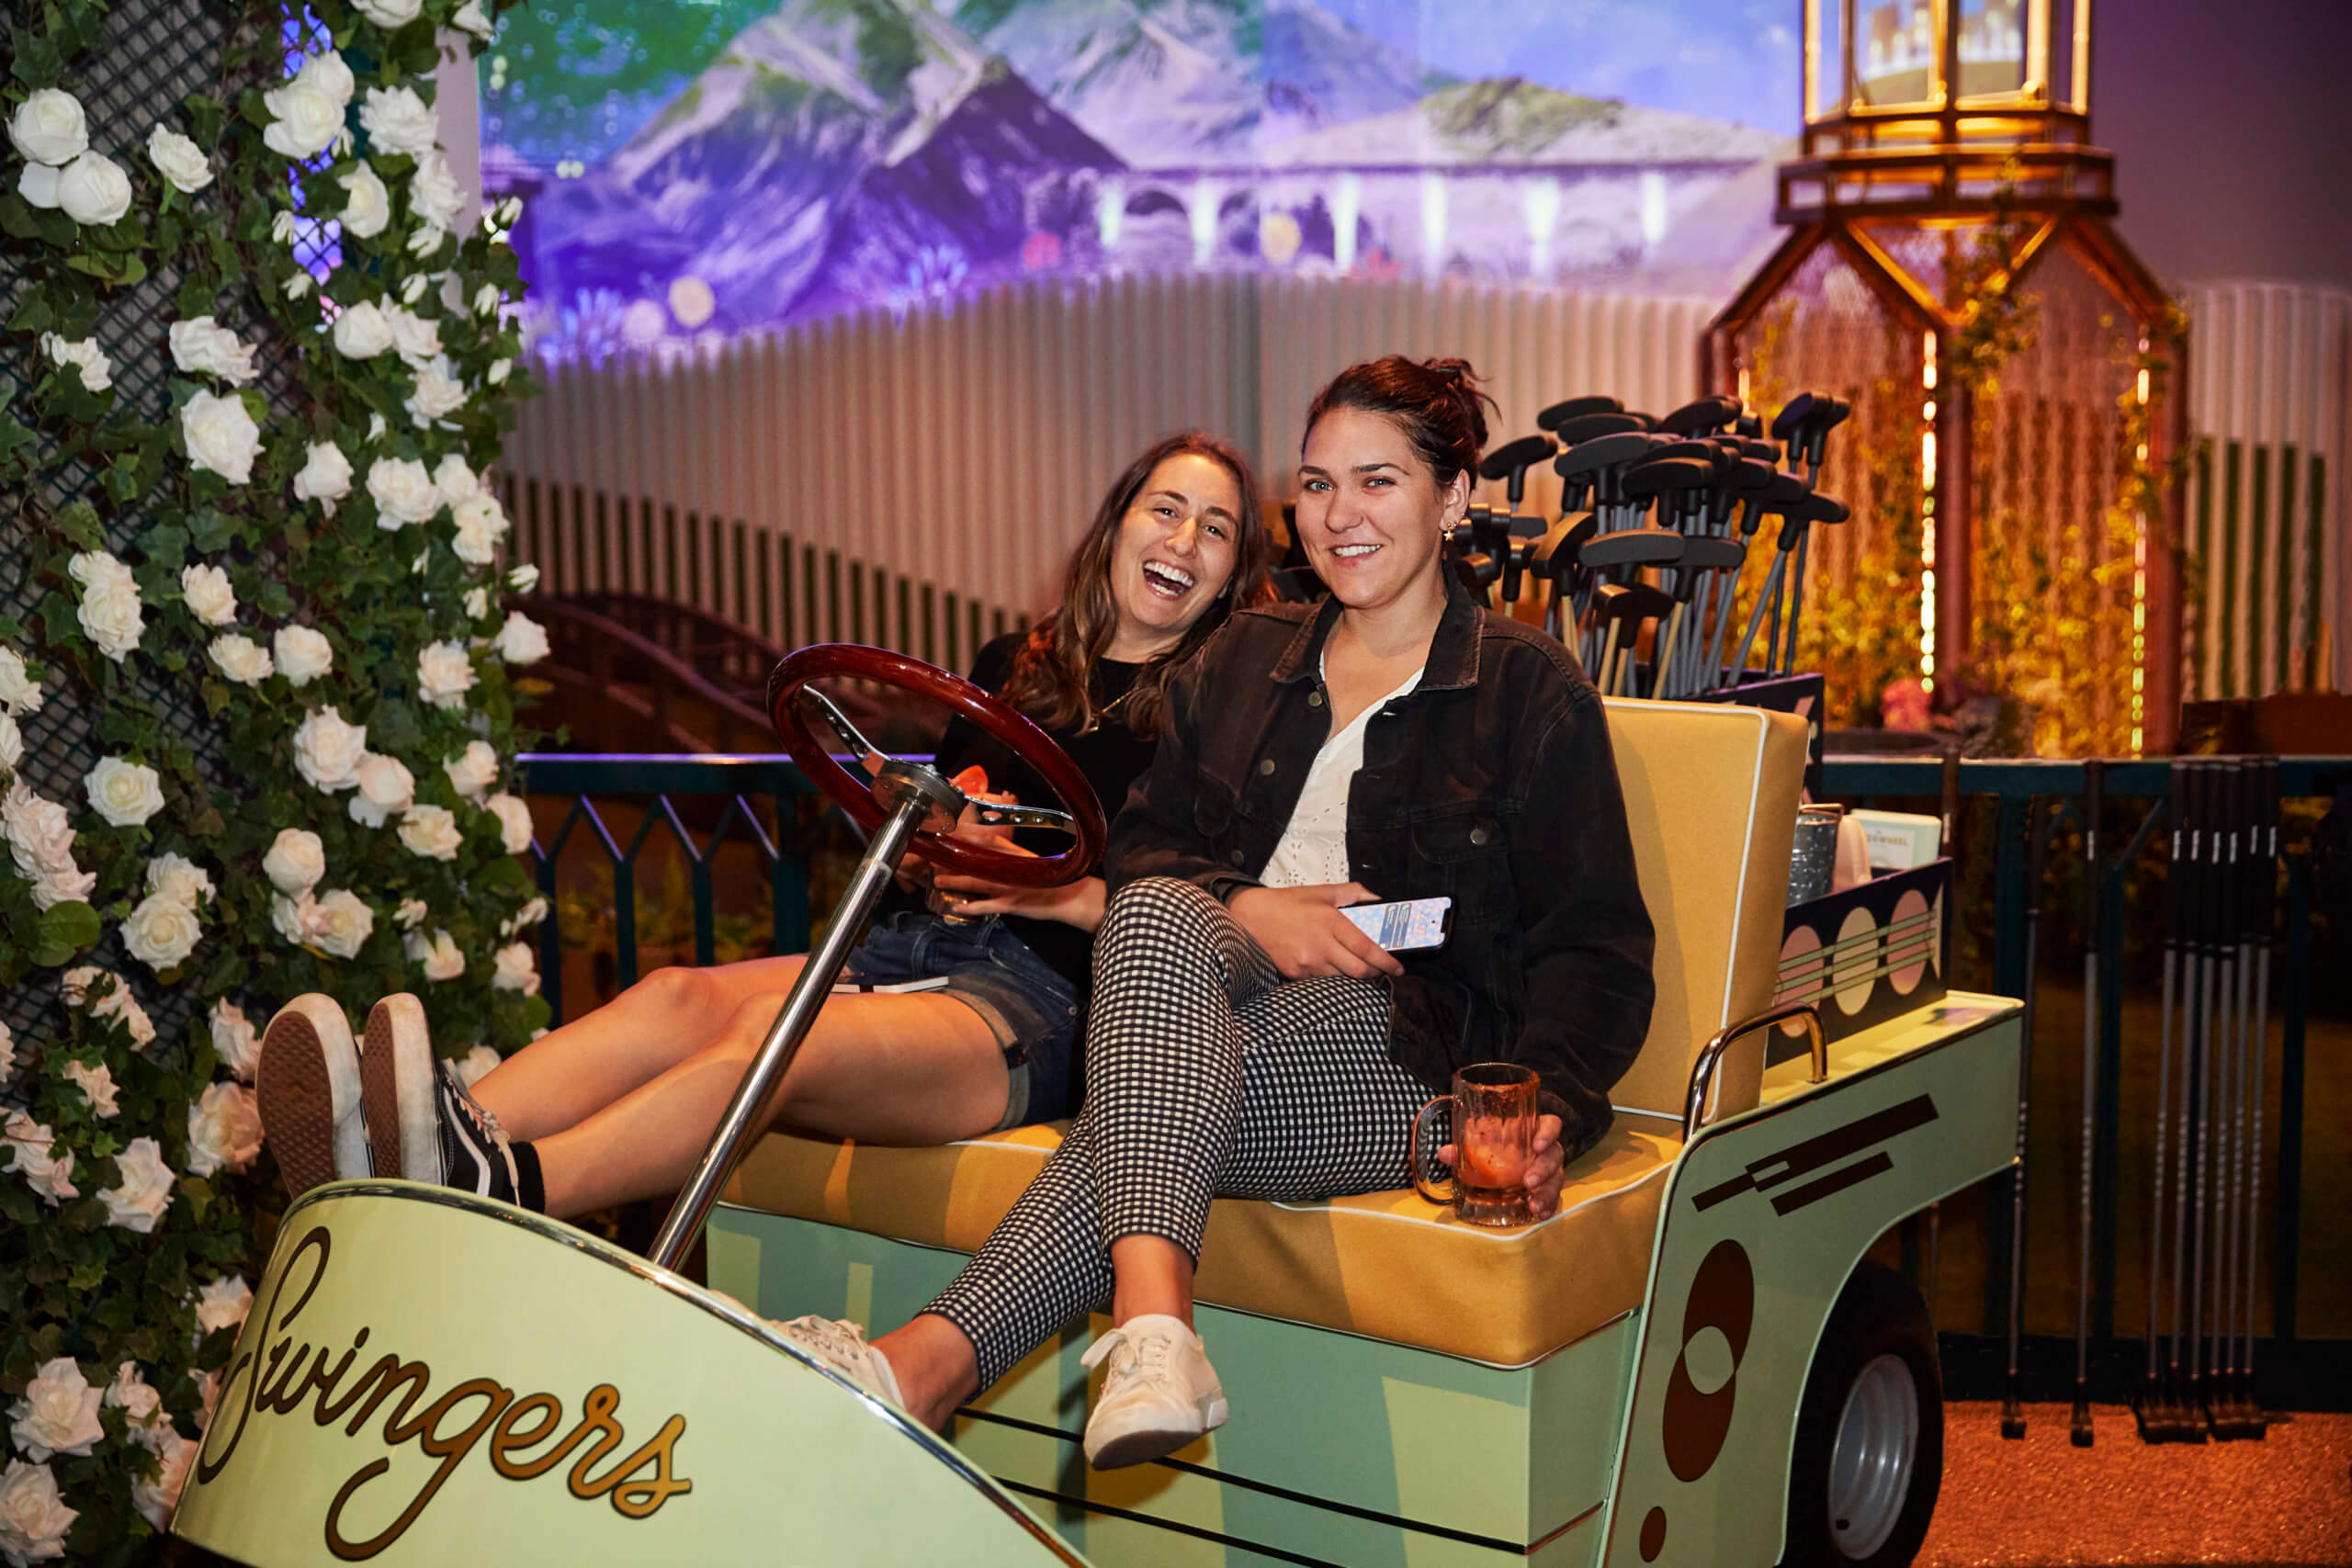 Swingers brings immersive mini golf experience to New York City with local fare and drinks amNewYork picture